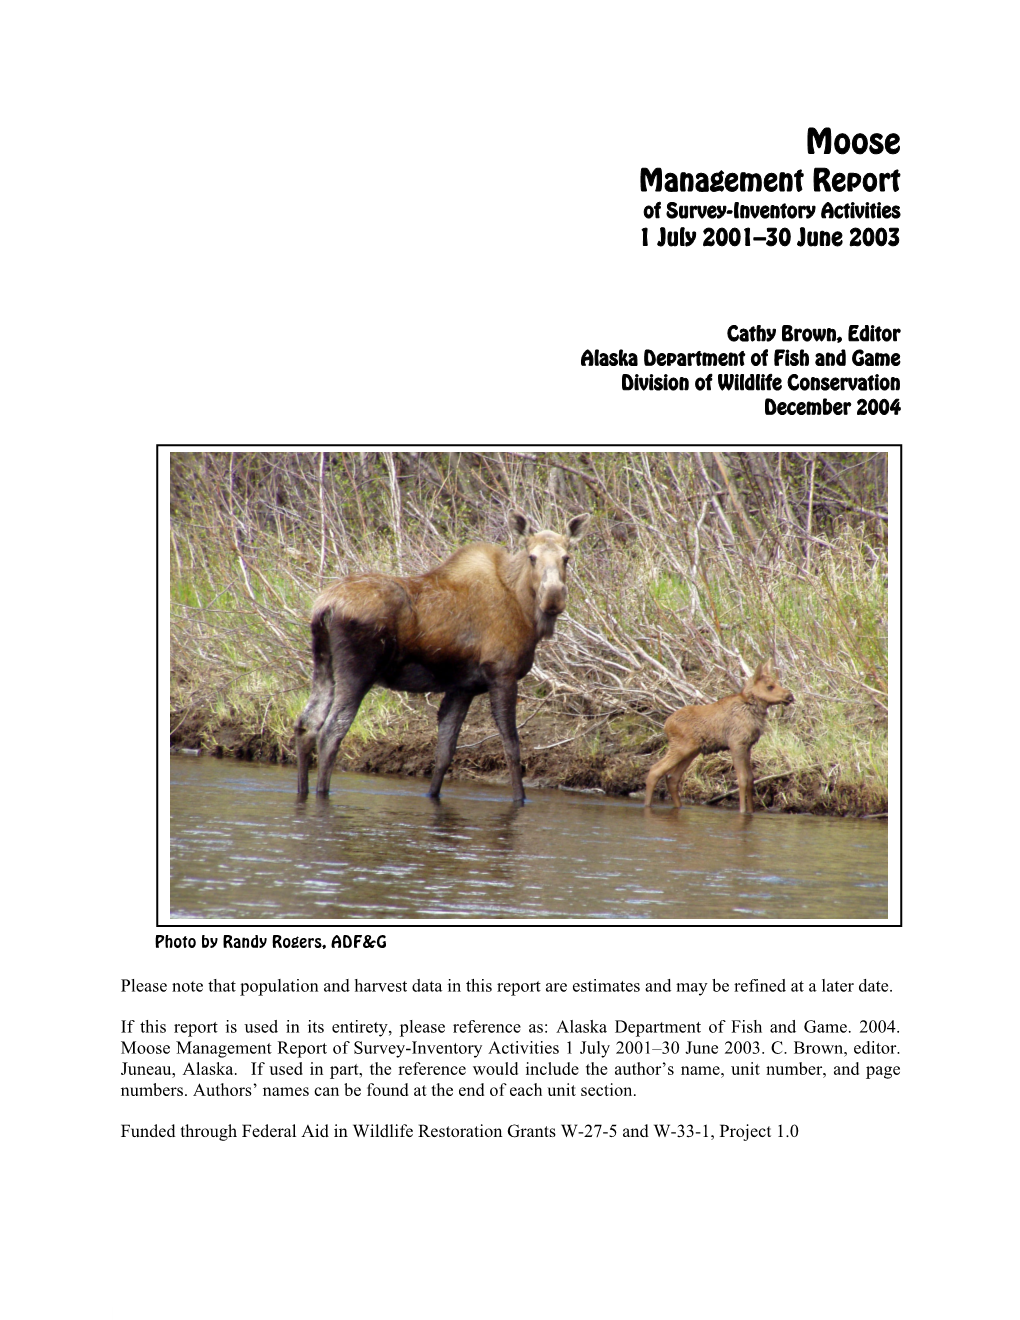 Moose Management Report of Survey Inventory Activities 1 July 2001-30